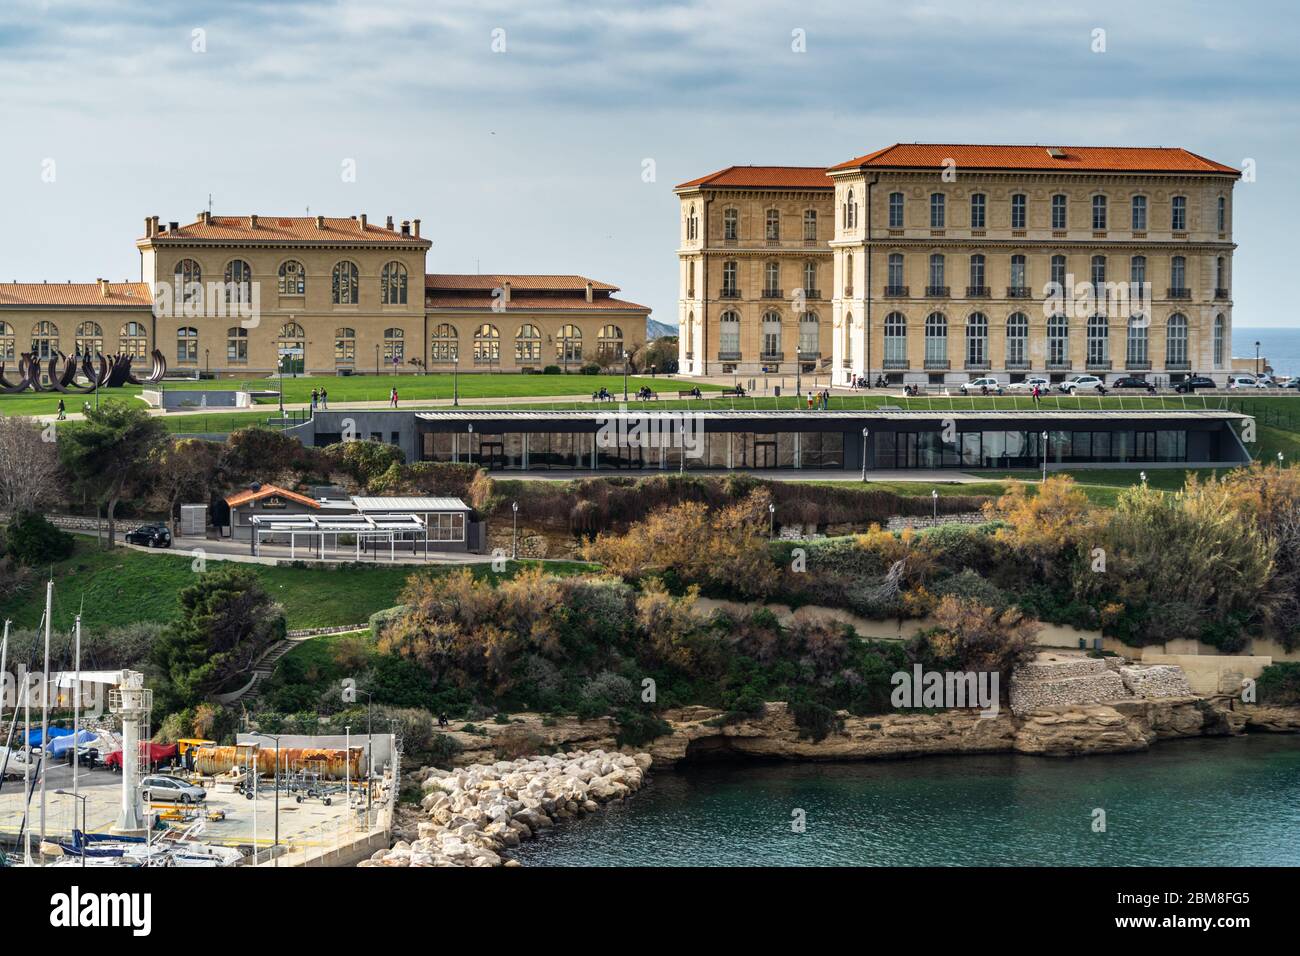 The Palais du Pharo at Marseille Old port, an historic palace built in 19th century, France Stock Photo